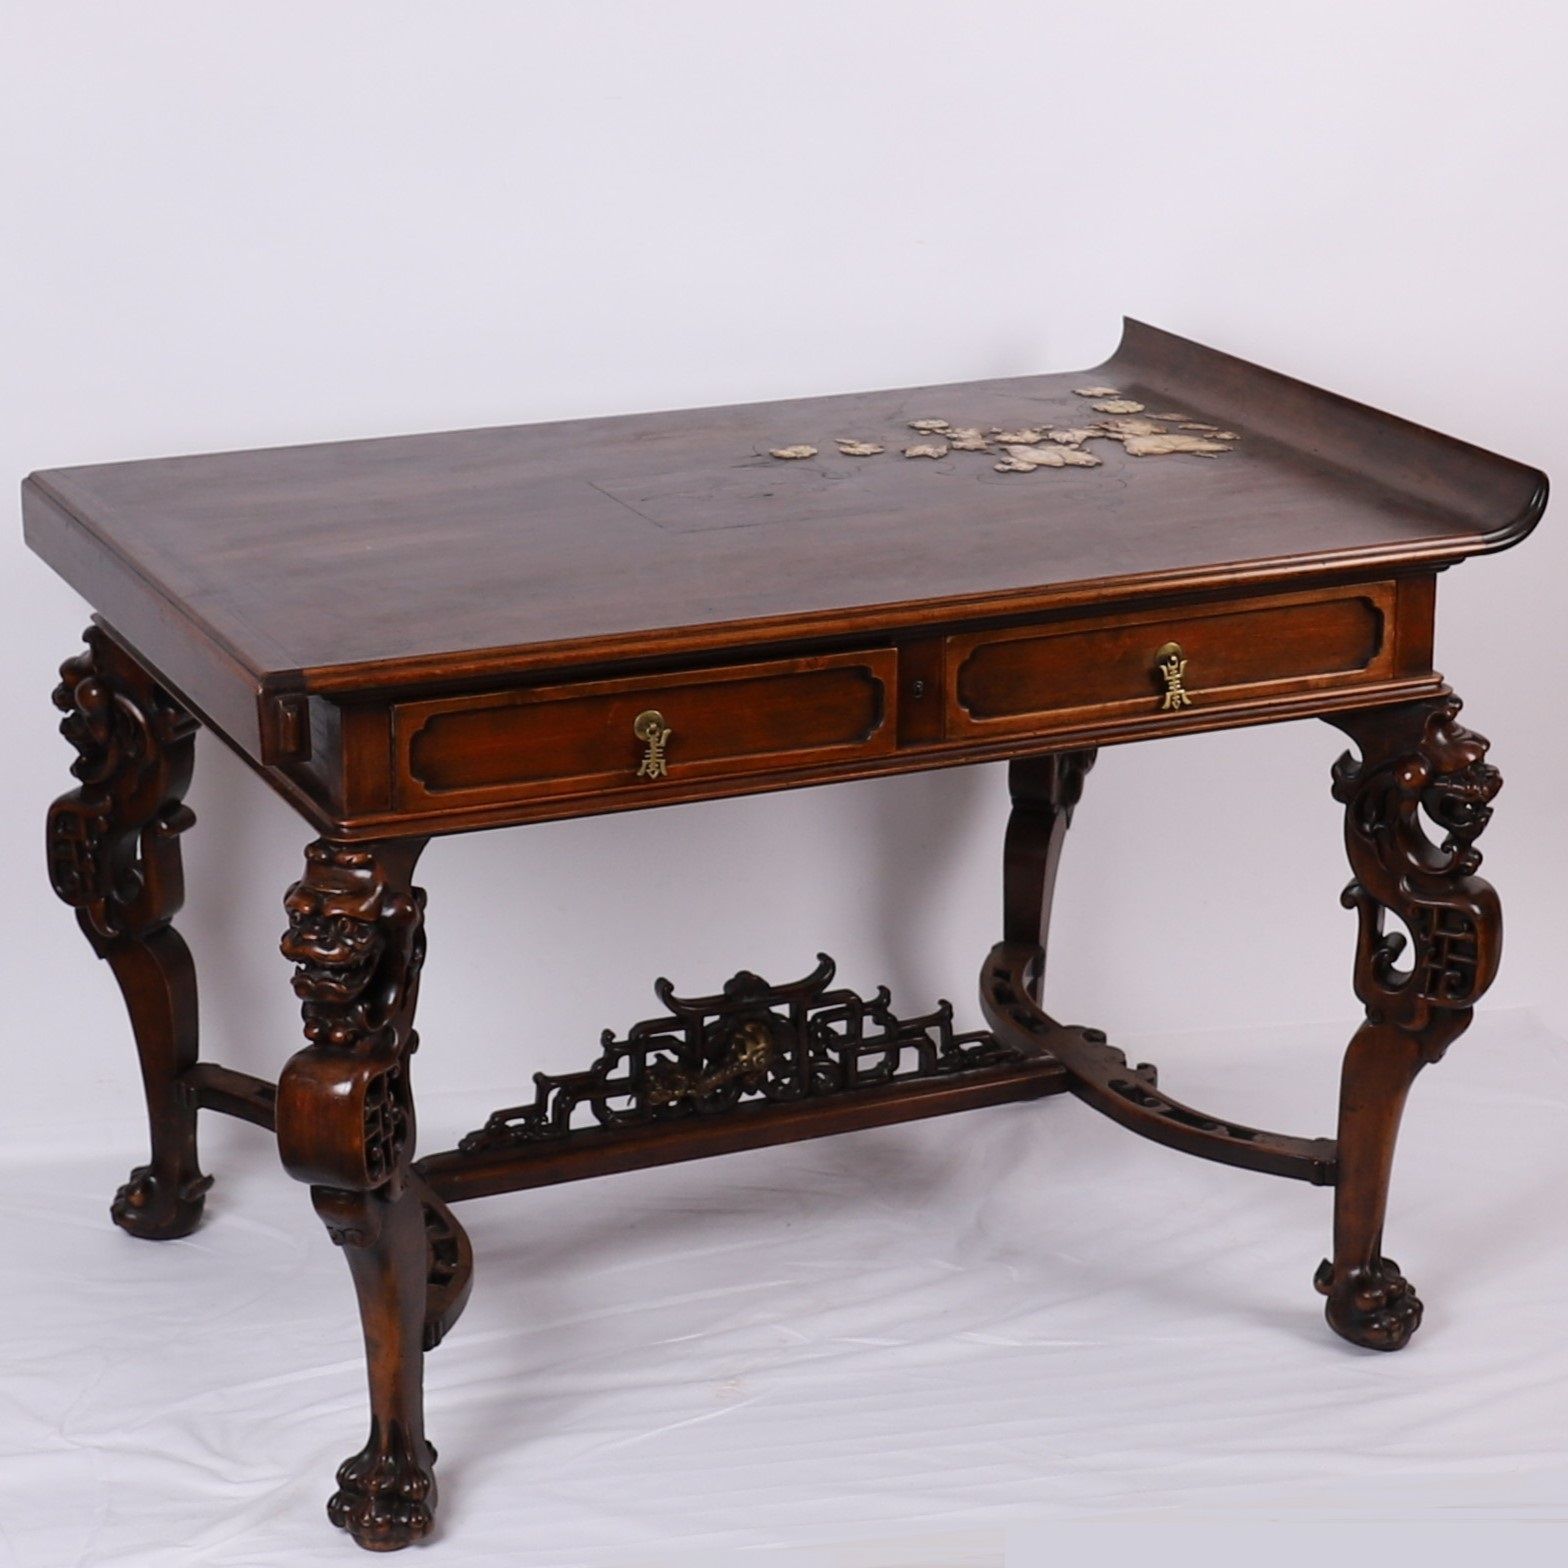 Null TABLE-BUREAU ATTRIBUTED TO GABRIEL VIARDOT
Opening with two drawers in the &hellip;